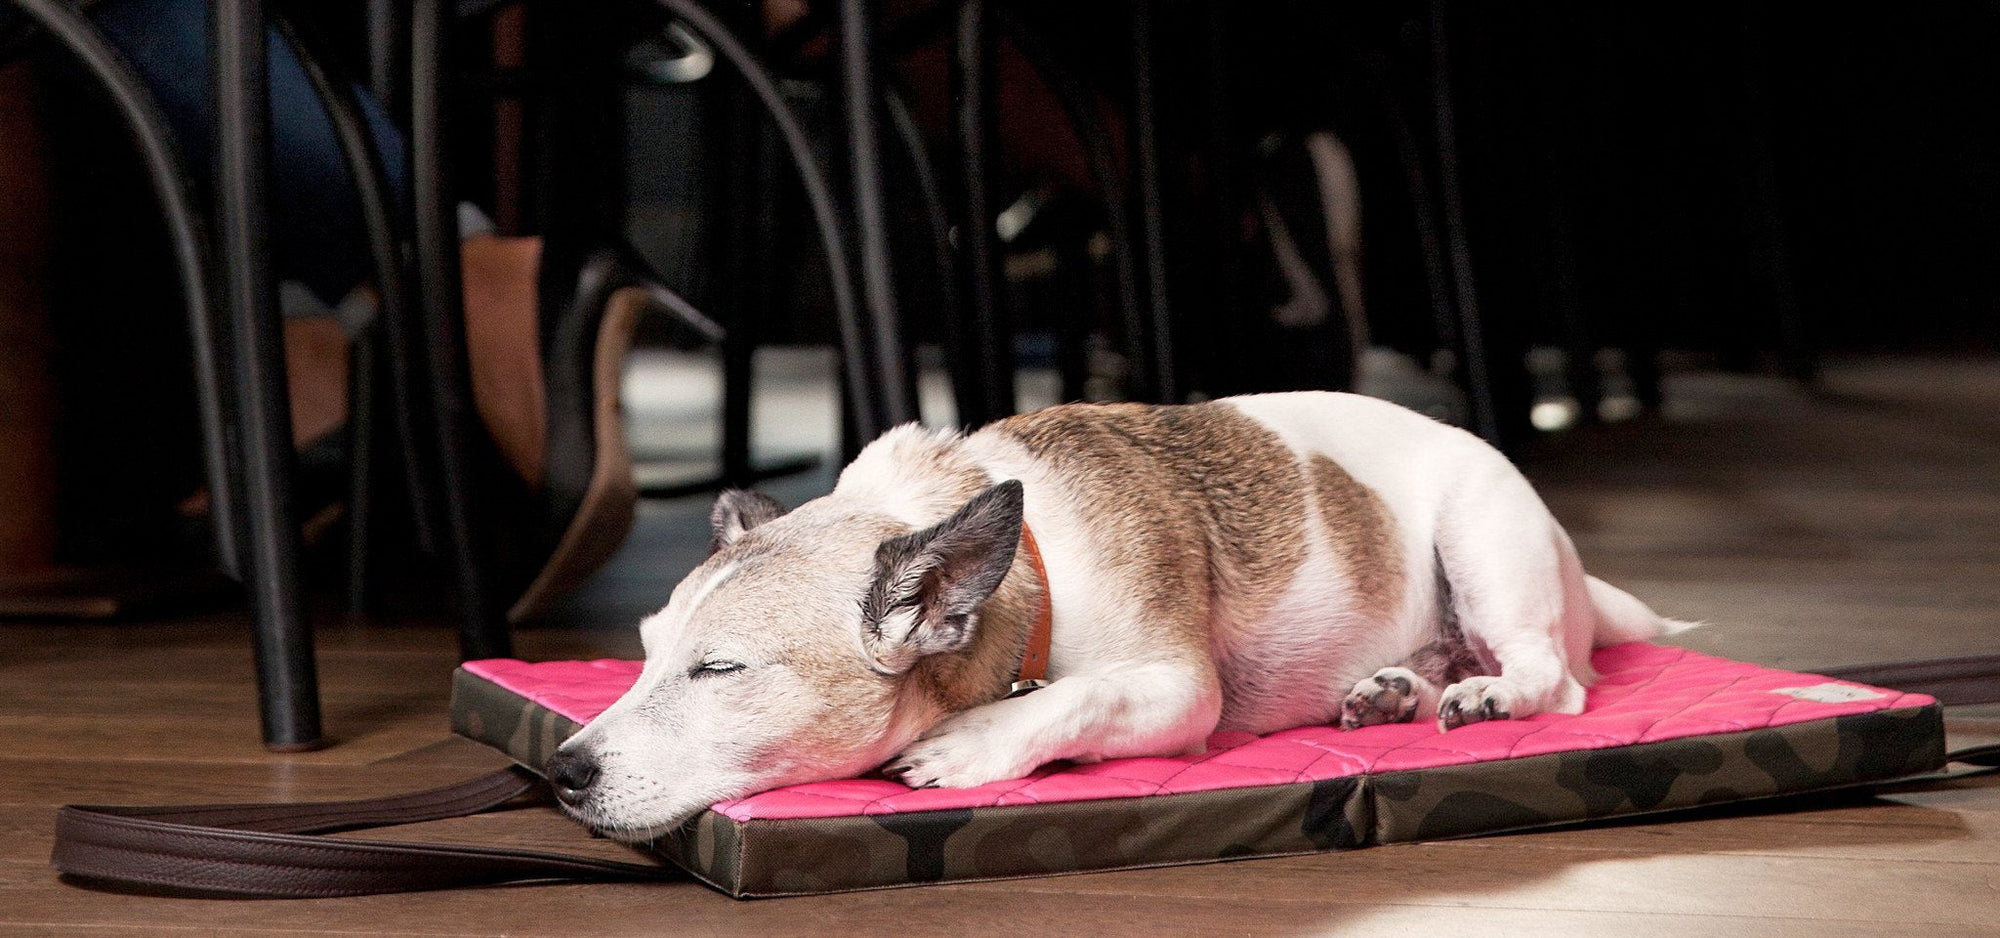 KONA CAVE® luxury travel dog bed. Portable folded dog mat with shoulder straps. Jack Russell Terrier sleeping in a restaurant on a pink dog mat.